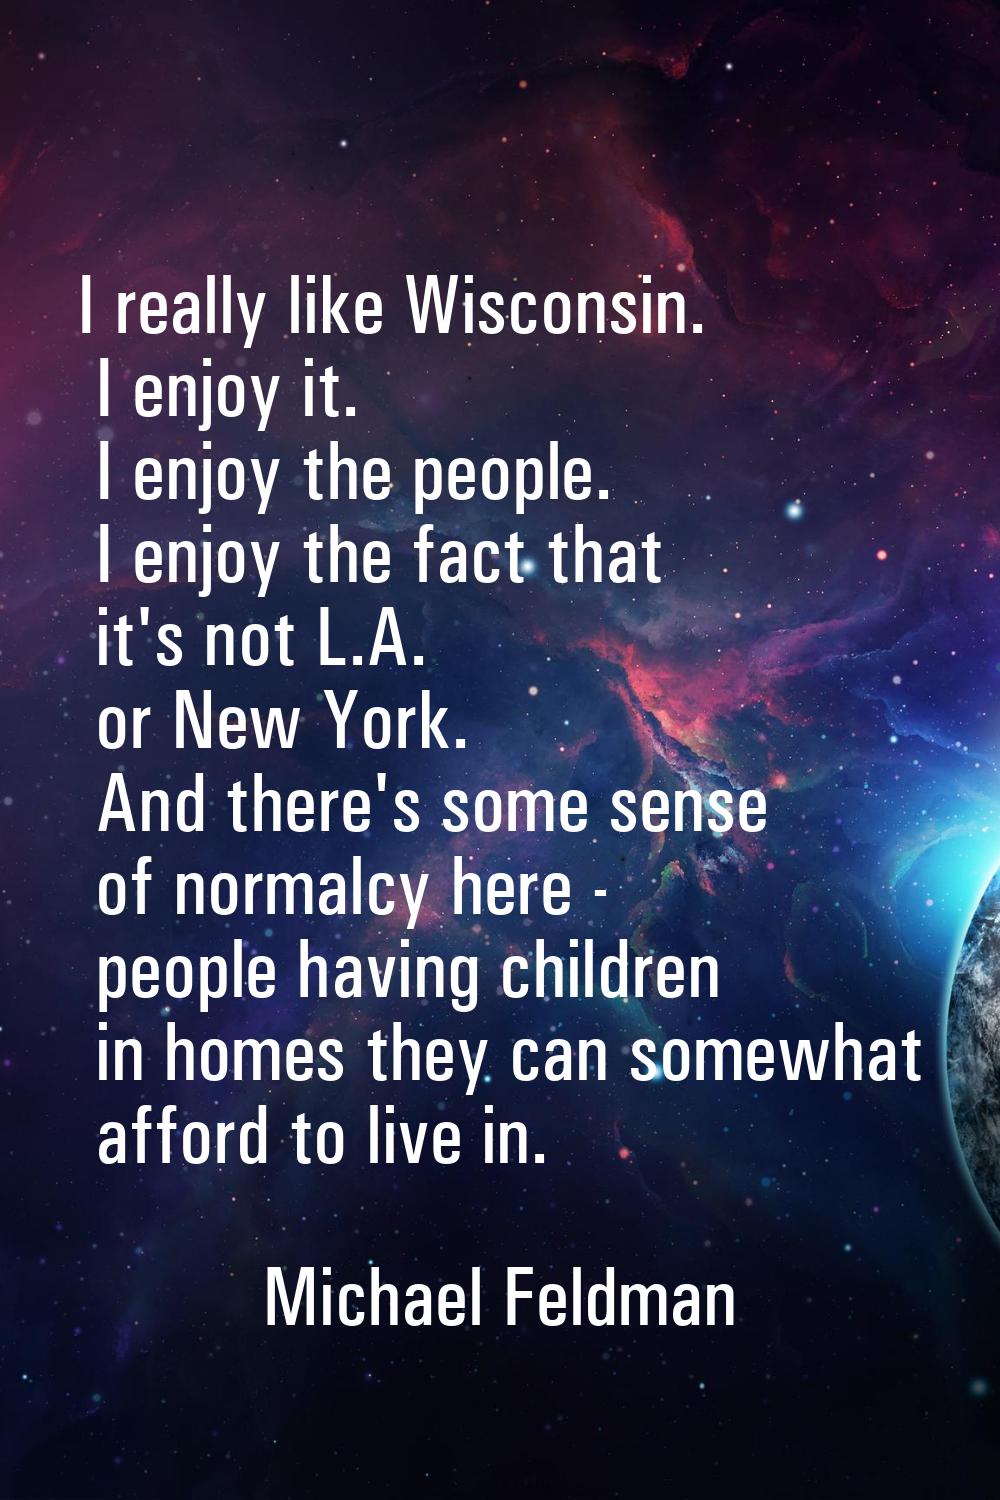 I really like Wisconsin. I enjoy it. I enjoy the people. I enjoy the fact that it's not L.A. or New